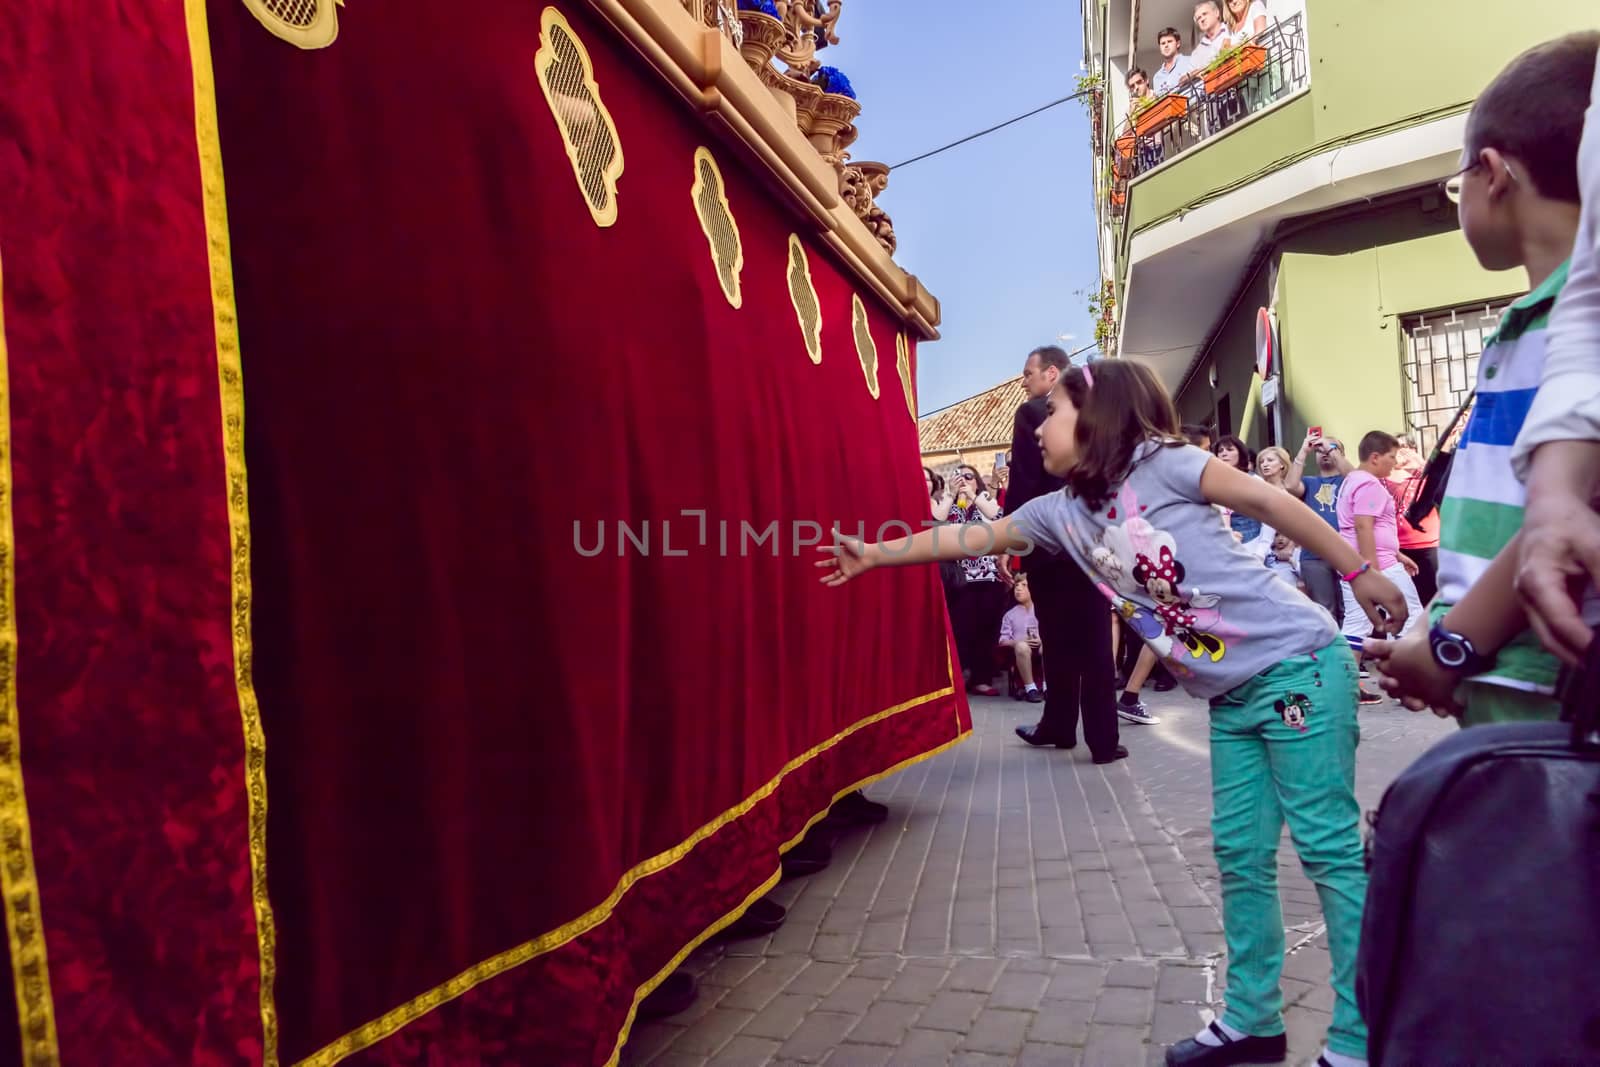 Girl tries to touch the skirt of the throne to have good luck, p by digicomphoto